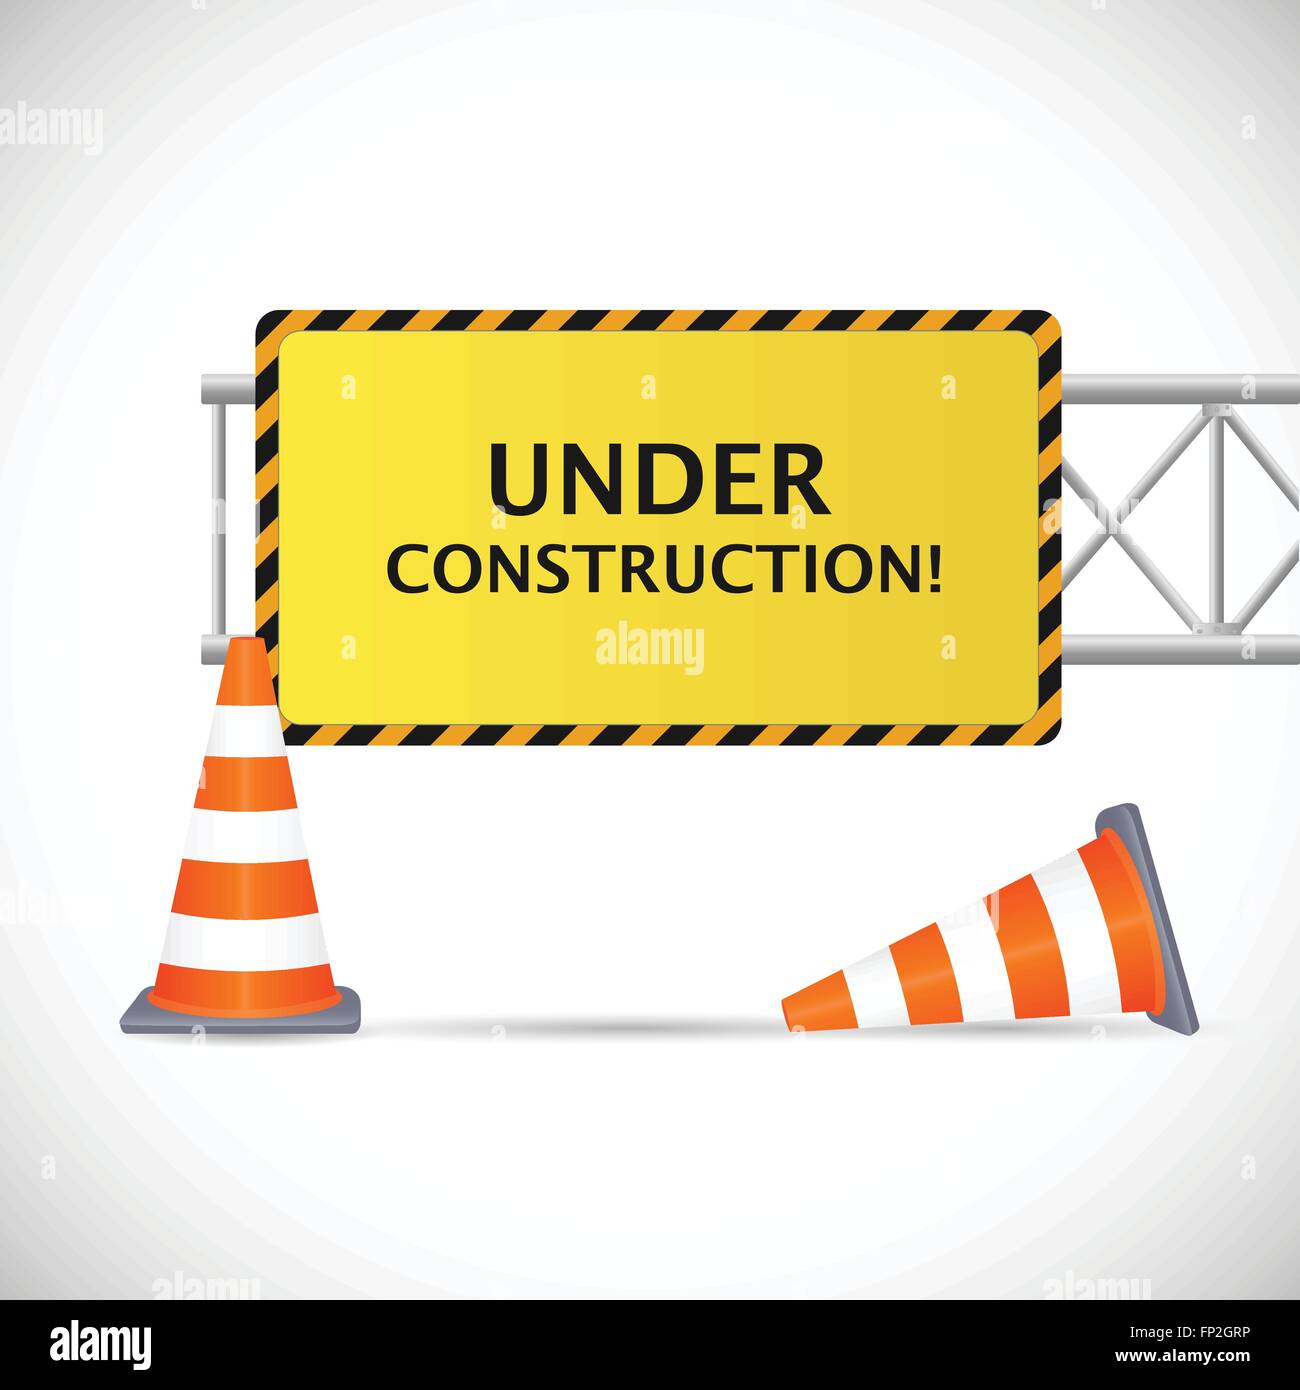 Illustration of an Under Construction sign with safety cones isolated on a white background. Stock Vector